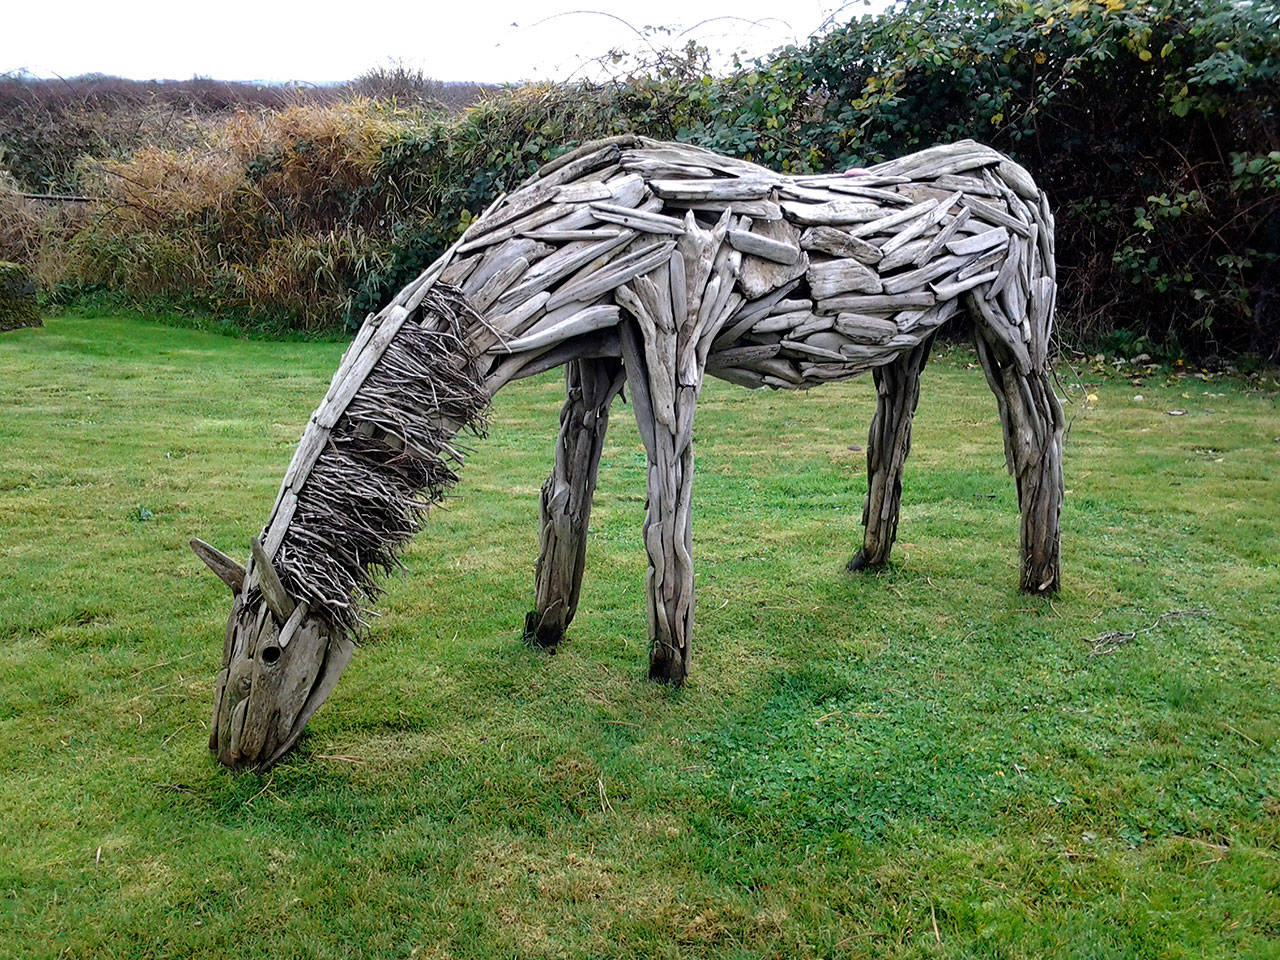 Although likely not intentional, this driftwood horse by artist Travis Foreman is a reminder that Keeper John S. Maggs once kept horses here. (Richard Walker/Kitsap News Group)                                 Although likely not intentional, this driftwood horse by artist Travis Foreman is a reminder that Keeper John S. Maggs once kept horses here. (Richard Walker/Kitsap News Group)